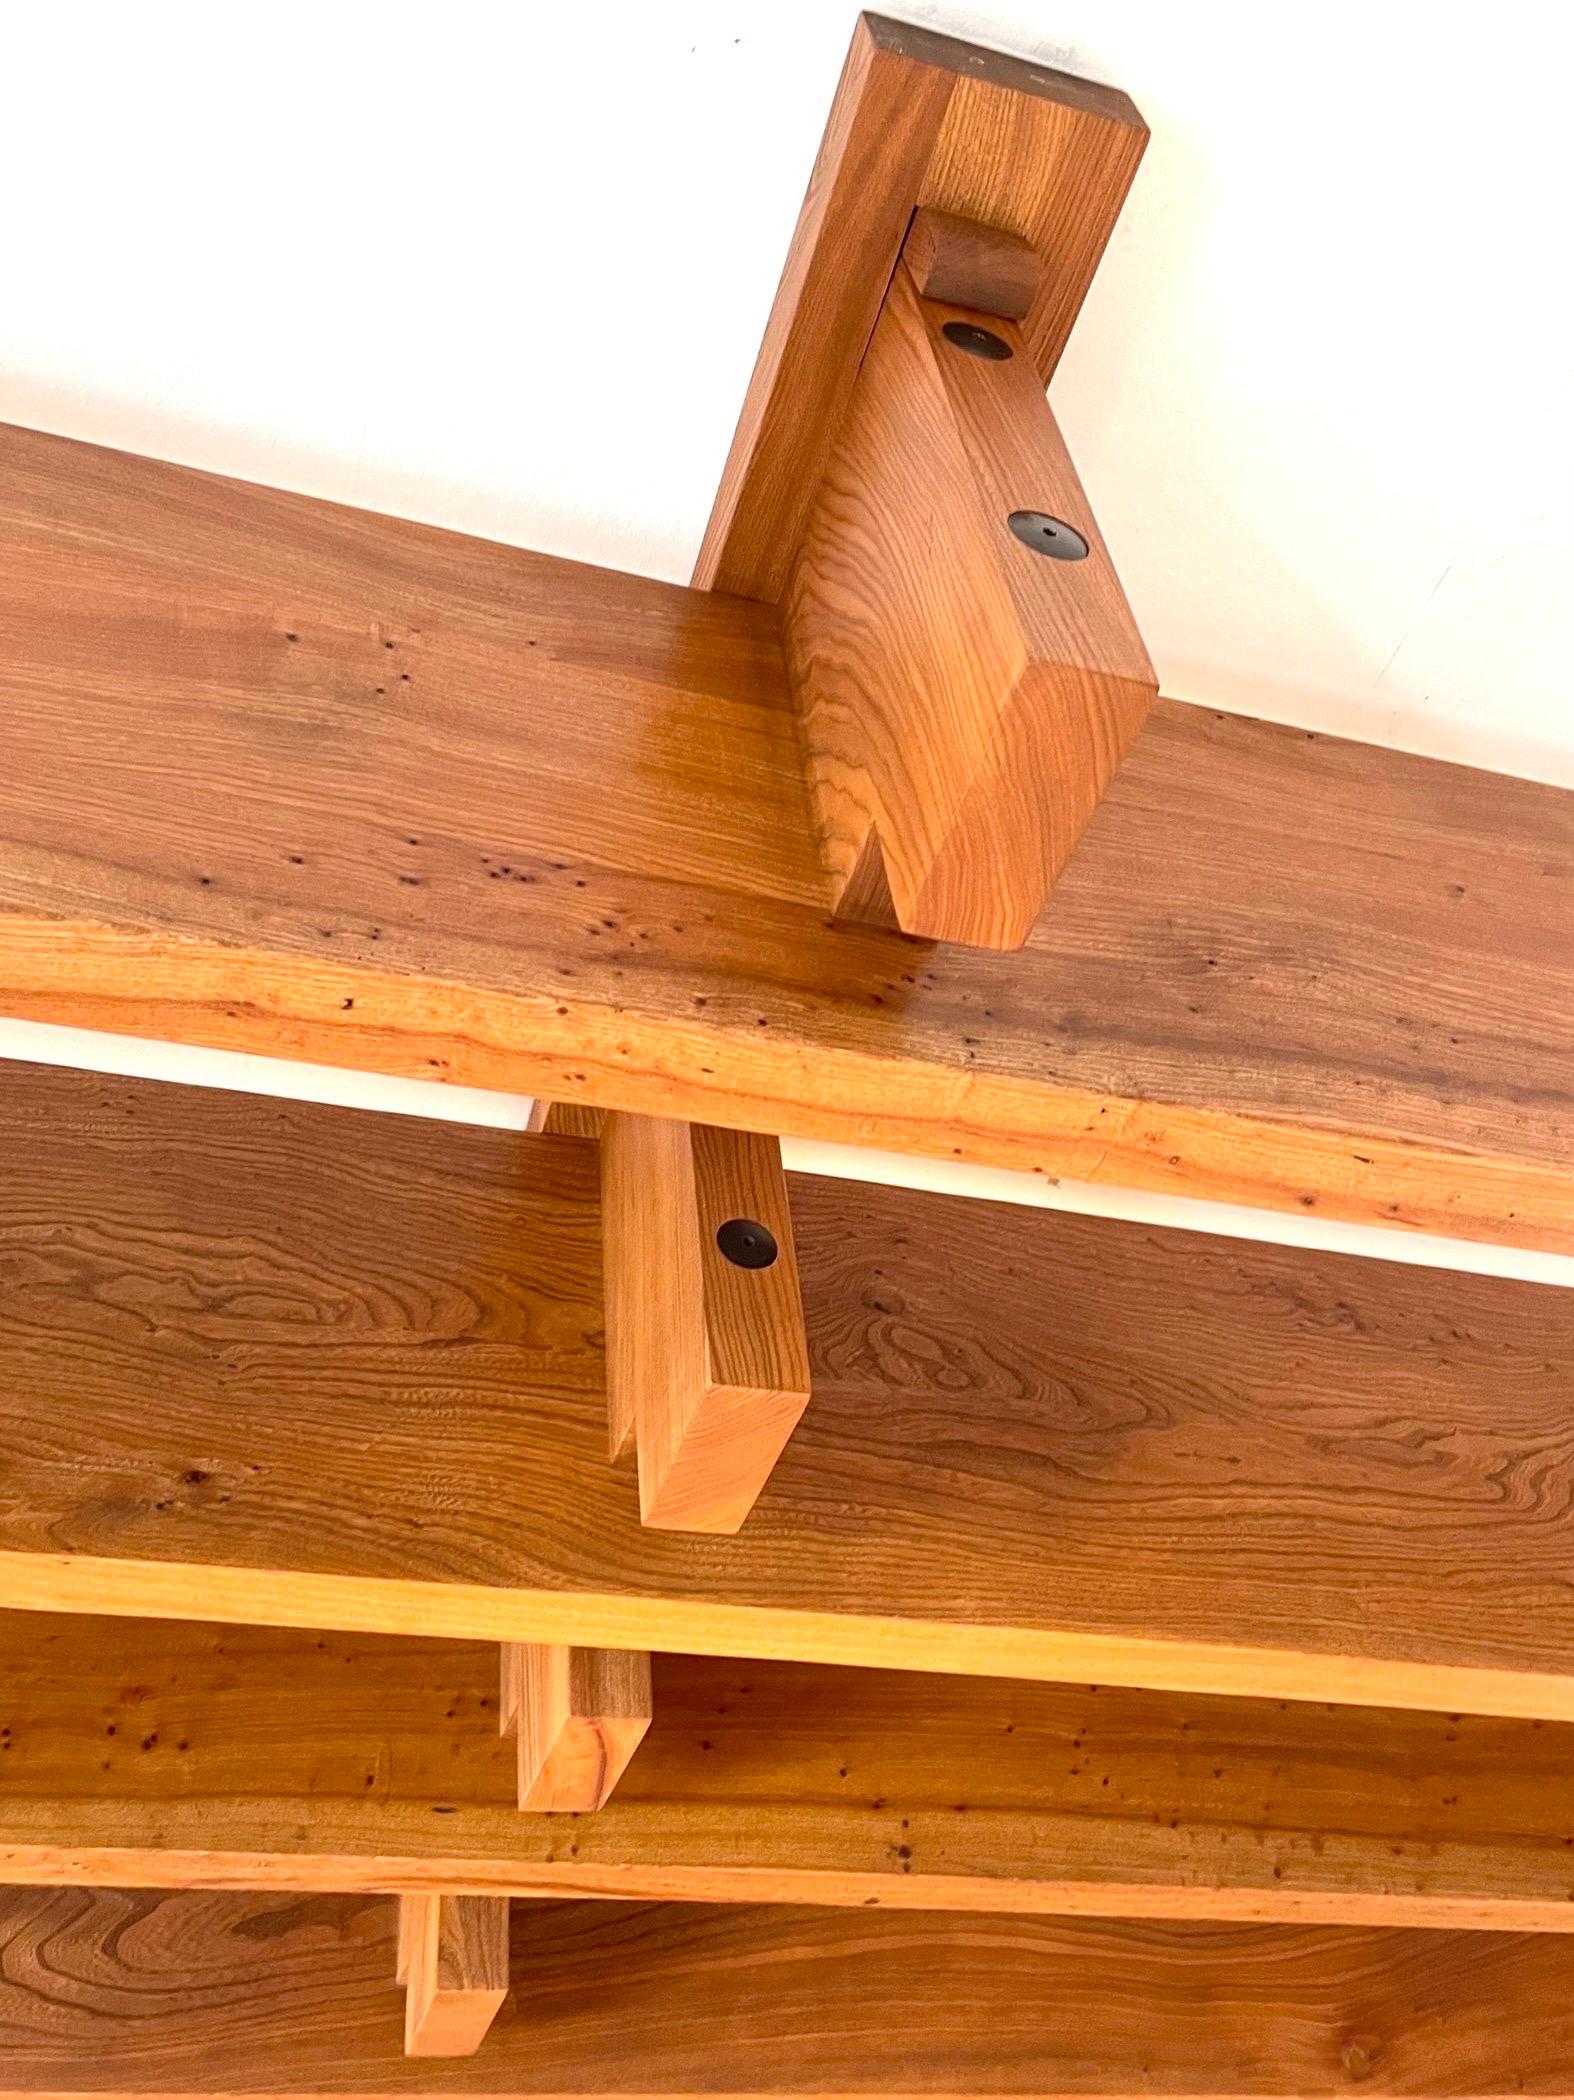 Rare, 284 cm long shelf by Pierre Chapo from 1976 in French elm, a now very rare wood, this component of four shelves fixed below eight consoles which wedge the books. The two vertical uprights bear on the floor. Fixing them to the wall does not